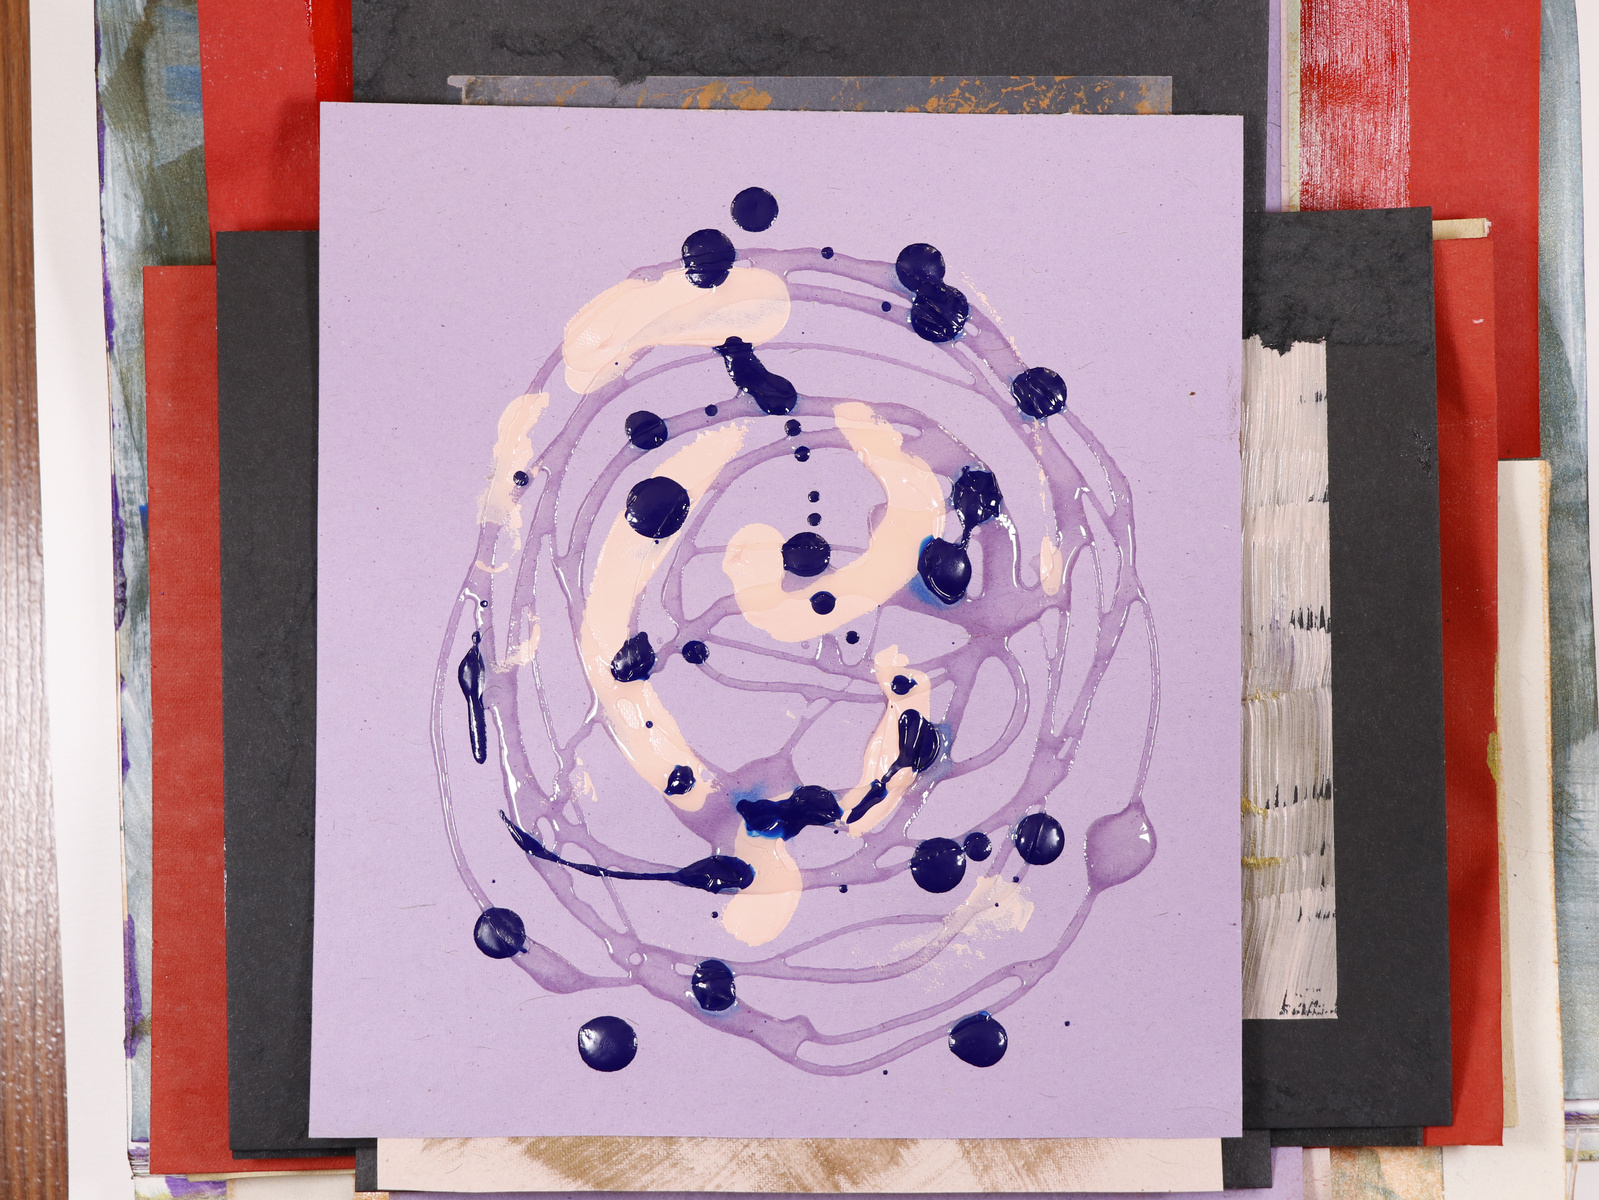 A stack of paintings with a purple painting on the top.